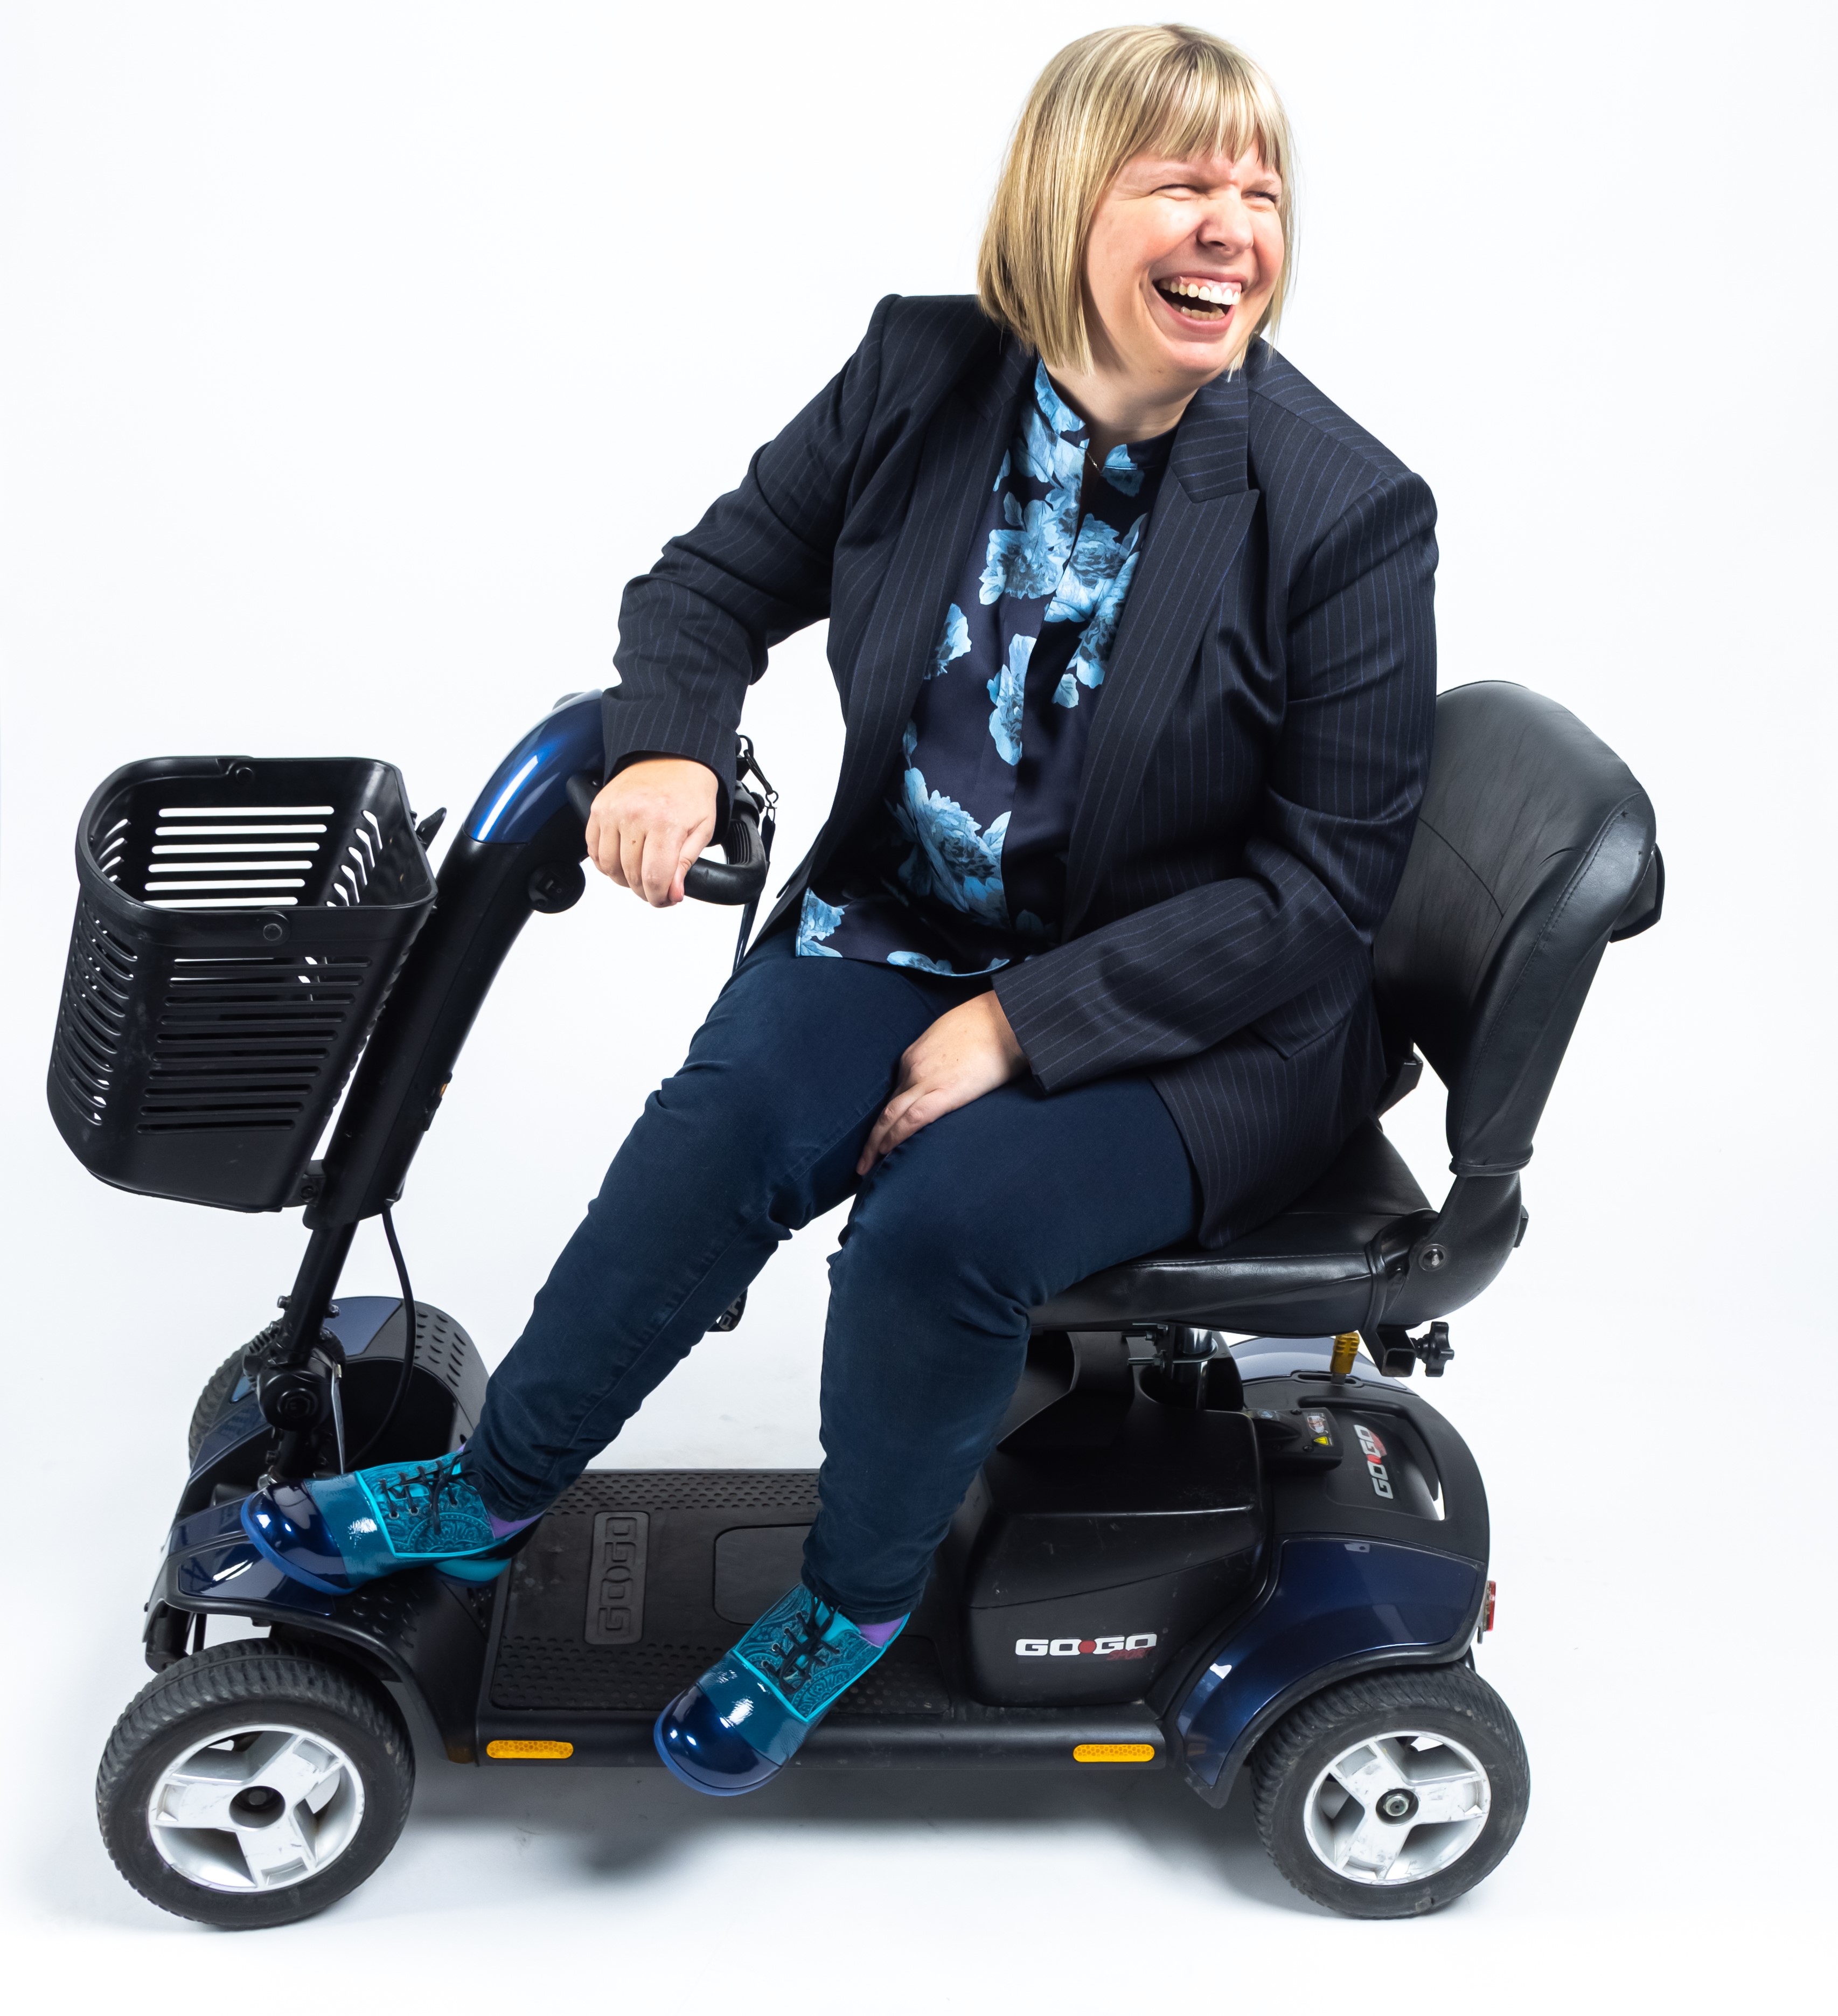 Darby Lee Young who has short blonde hair cut in a bob. Darby is wearing a striped blazer, a floral shirt and shiny blue shoes. She is laughing and is using a motorized mobility device.